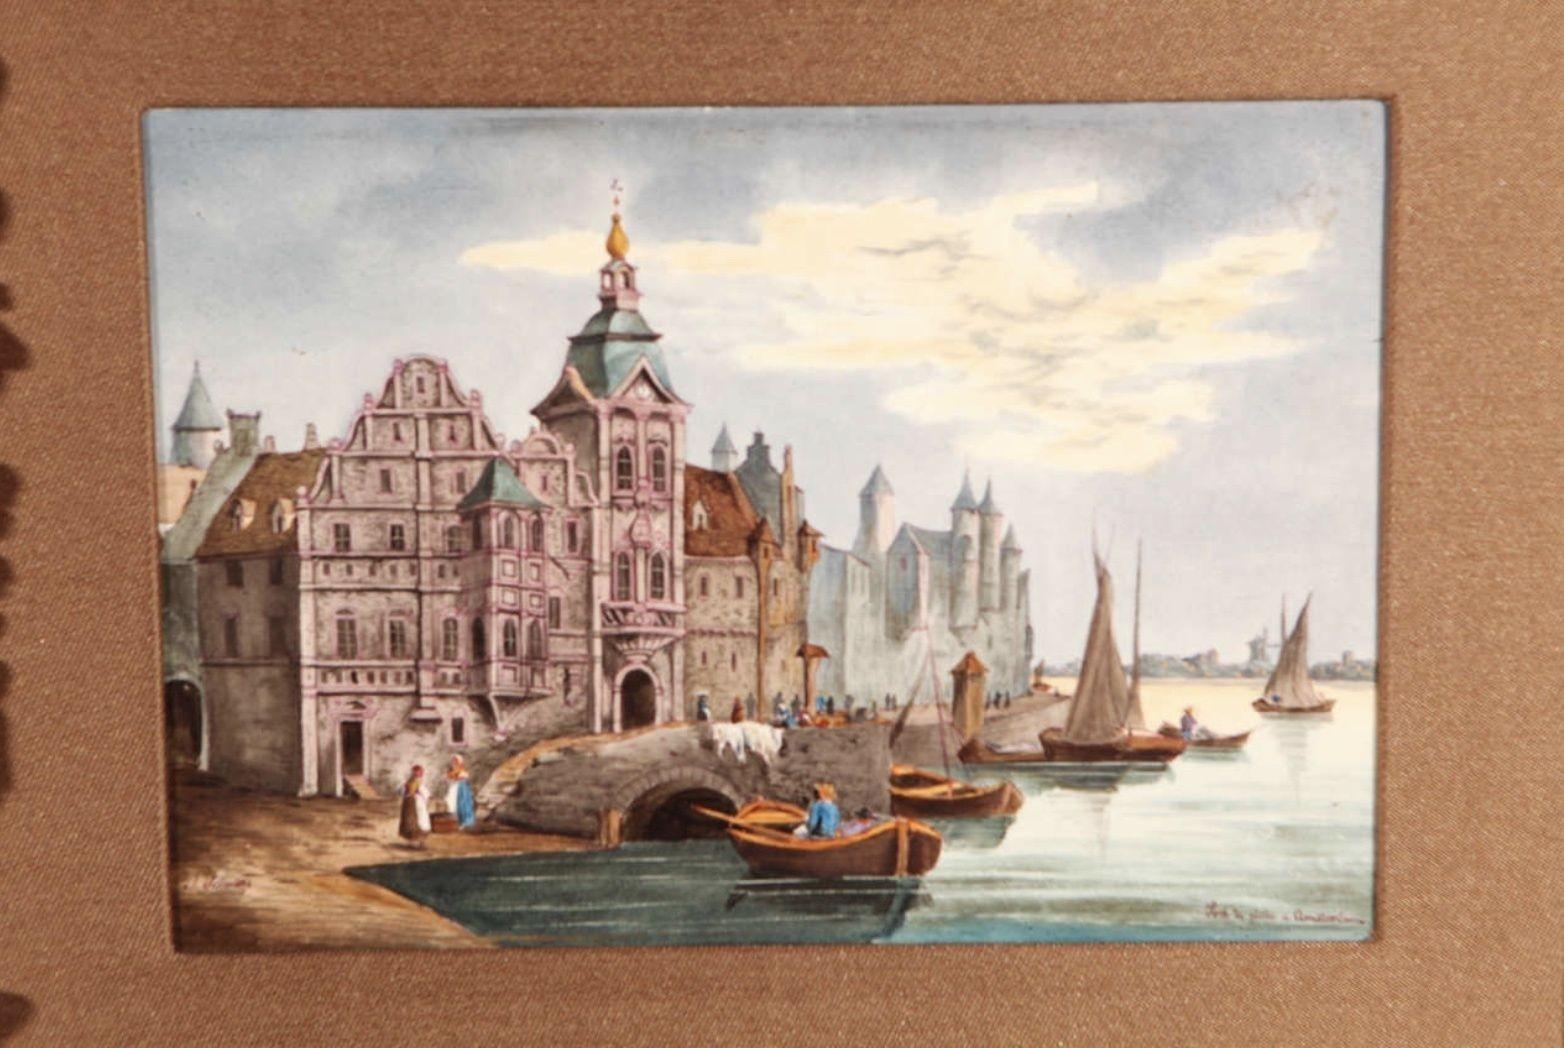 A late 19th century porcelain plaque of Port de Piche in Amsterdam. It is signed J Schuler. Made by H&B at the Choisy-le-Roi factory. Original elaborately hand-carved wood and gesso frame. Newly regilded. Image size is 11.25 long x 8 deep.